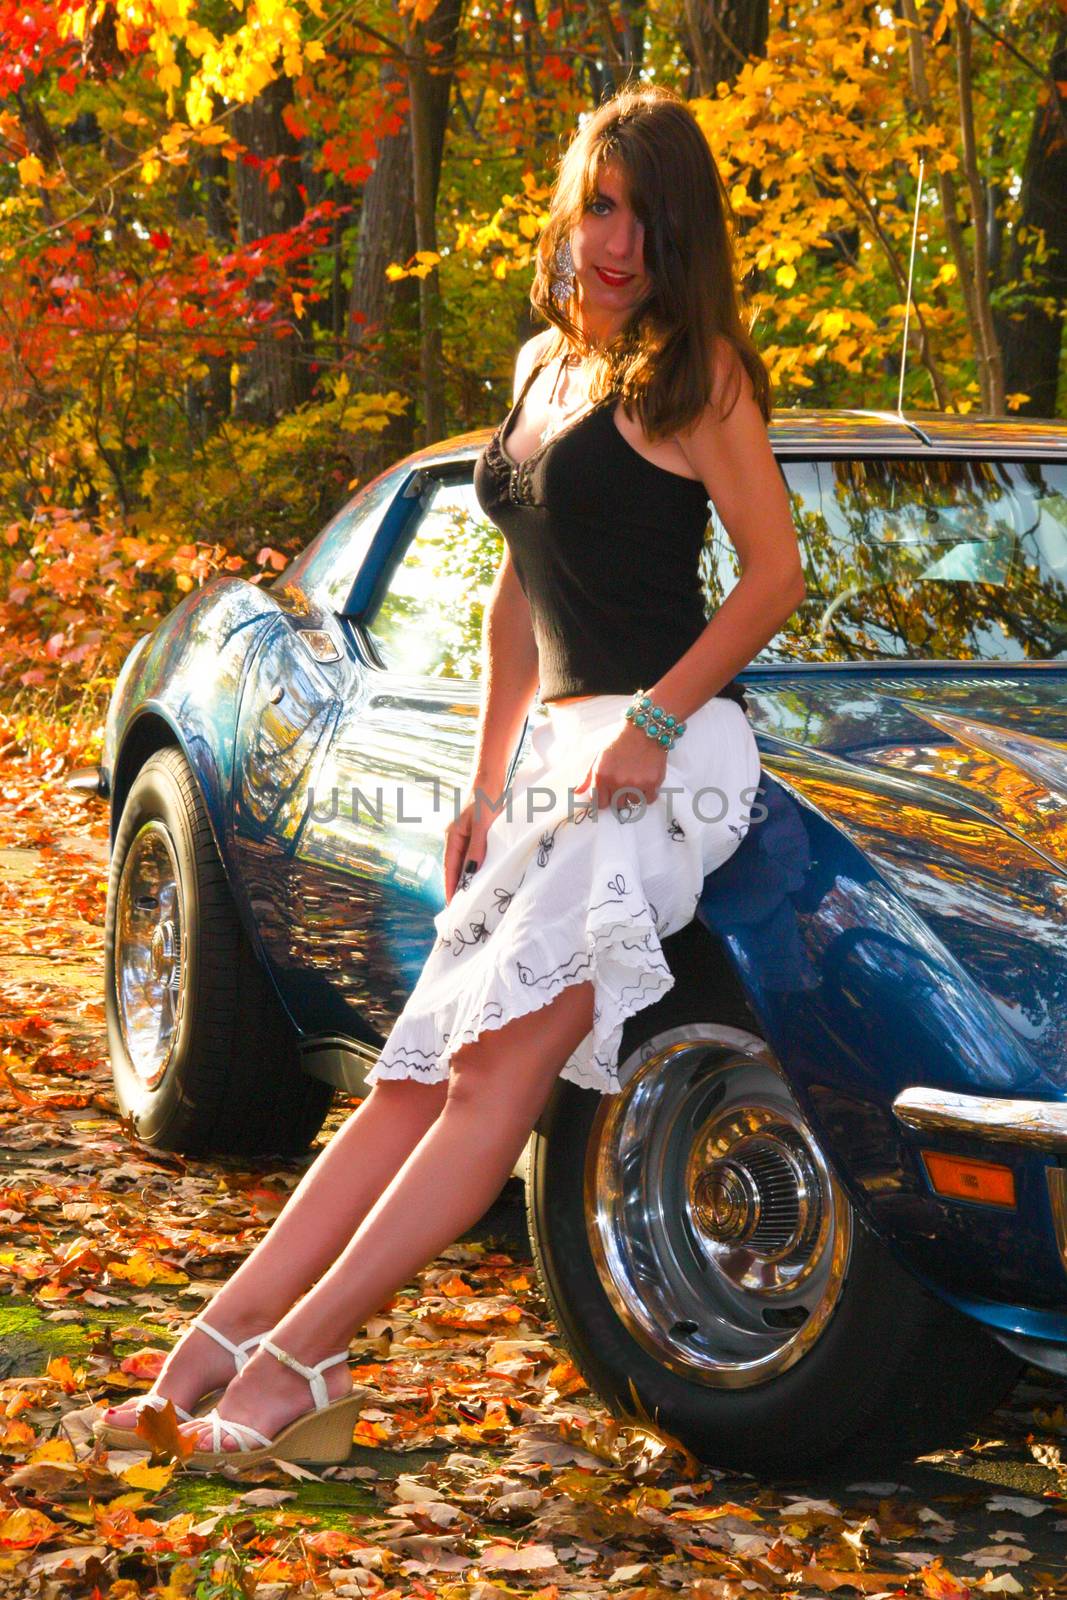 Pretty girl in dress leaning on car in fall leaves and foliage